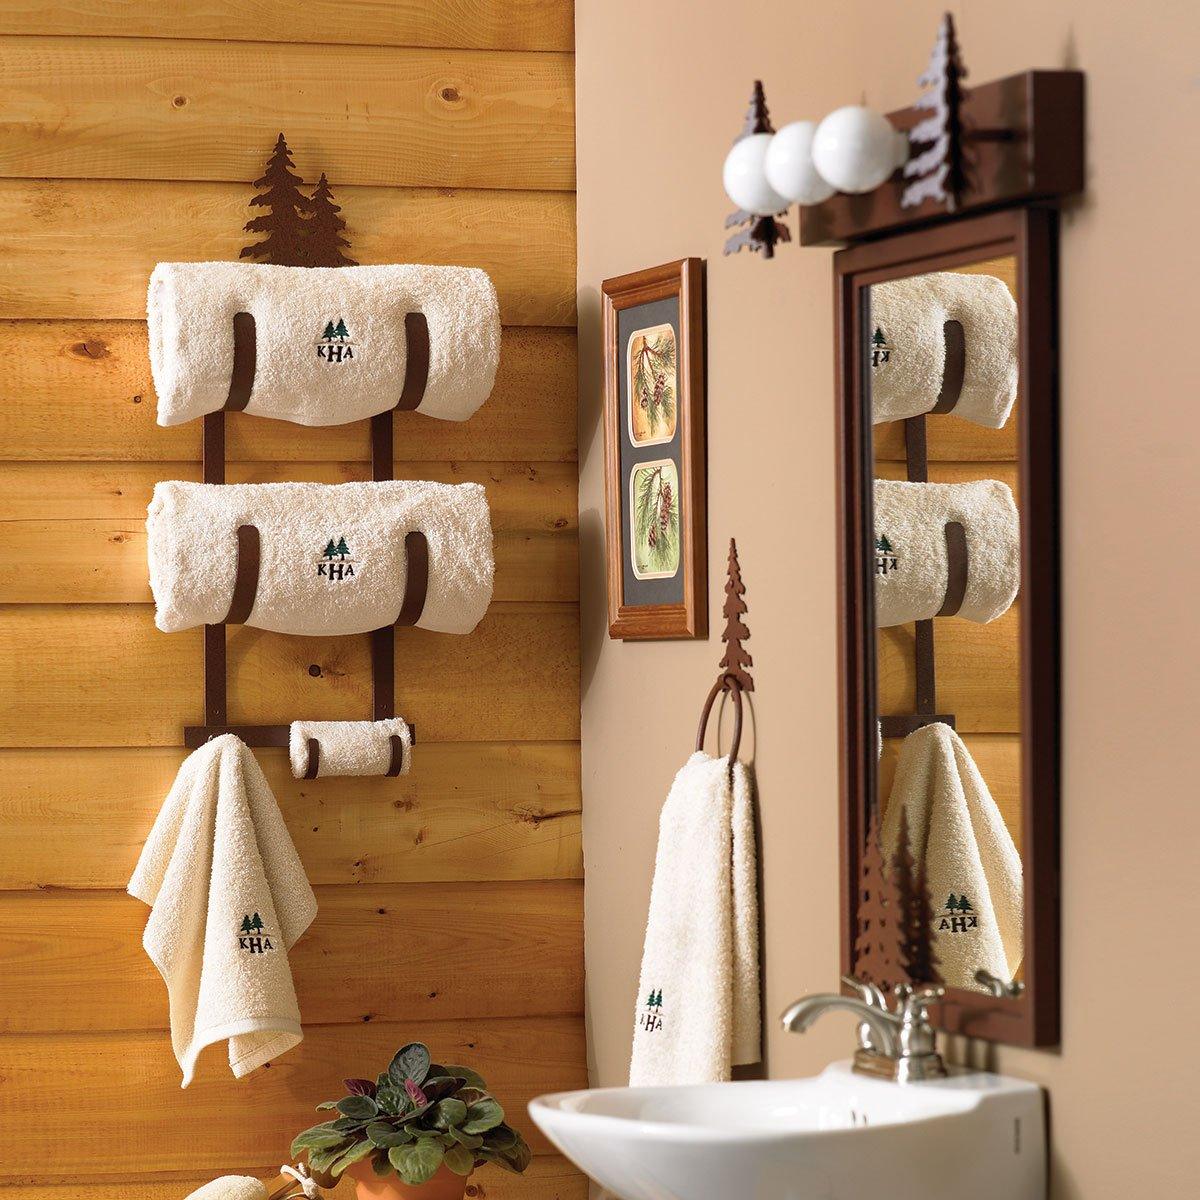 How to Spruce up your Cabin with Rustic Bathroom Décor - Wild Wings